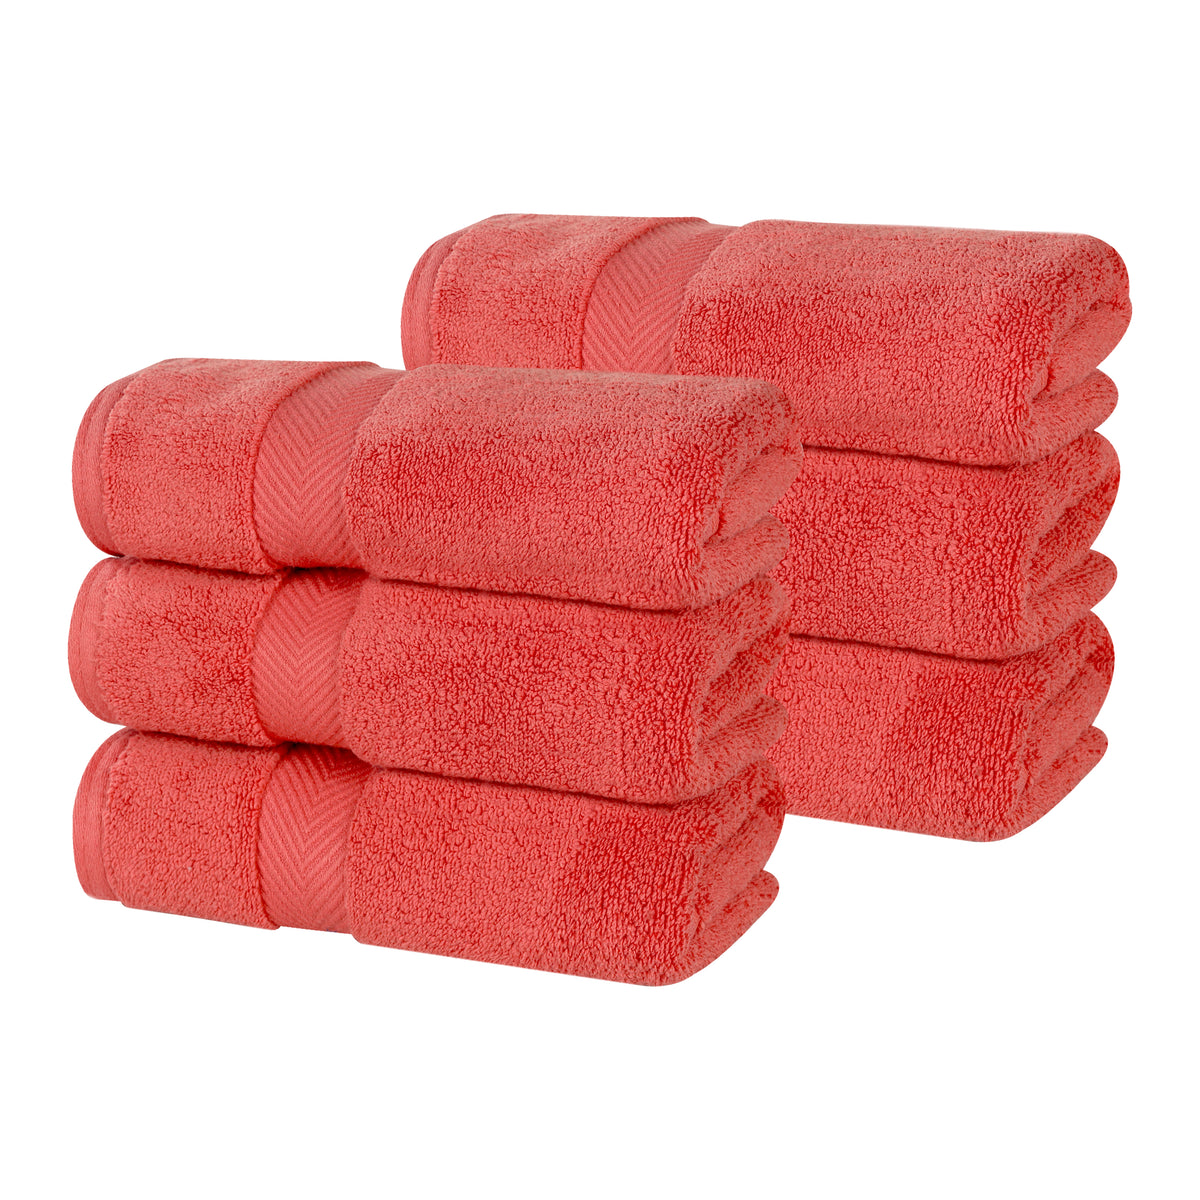 Zero Twist Cotton Solid Ultra-Soft Absorbent Hand Towel - Coral